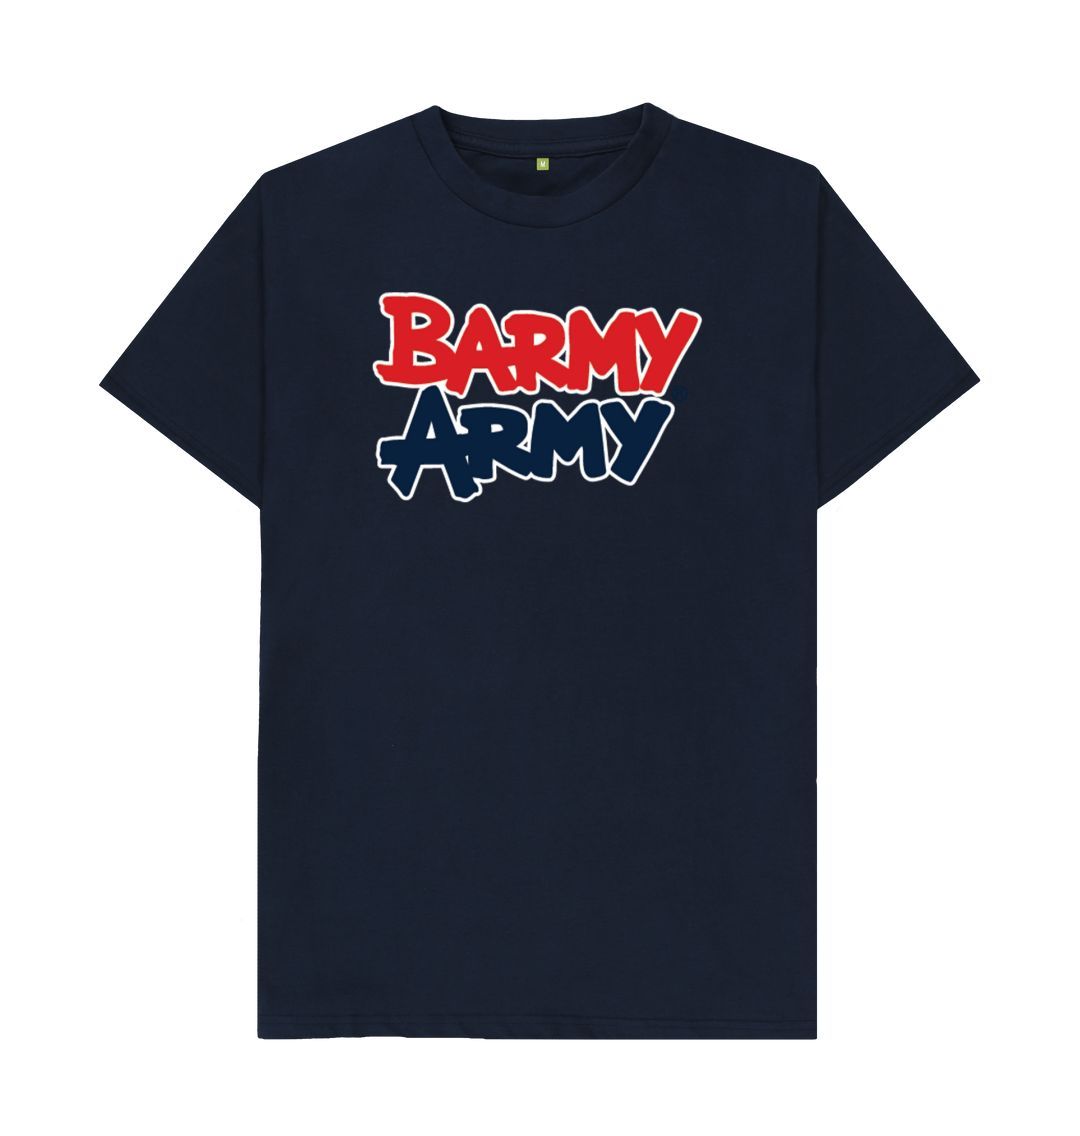 Navy Blue Barmy Army Large Print Tee